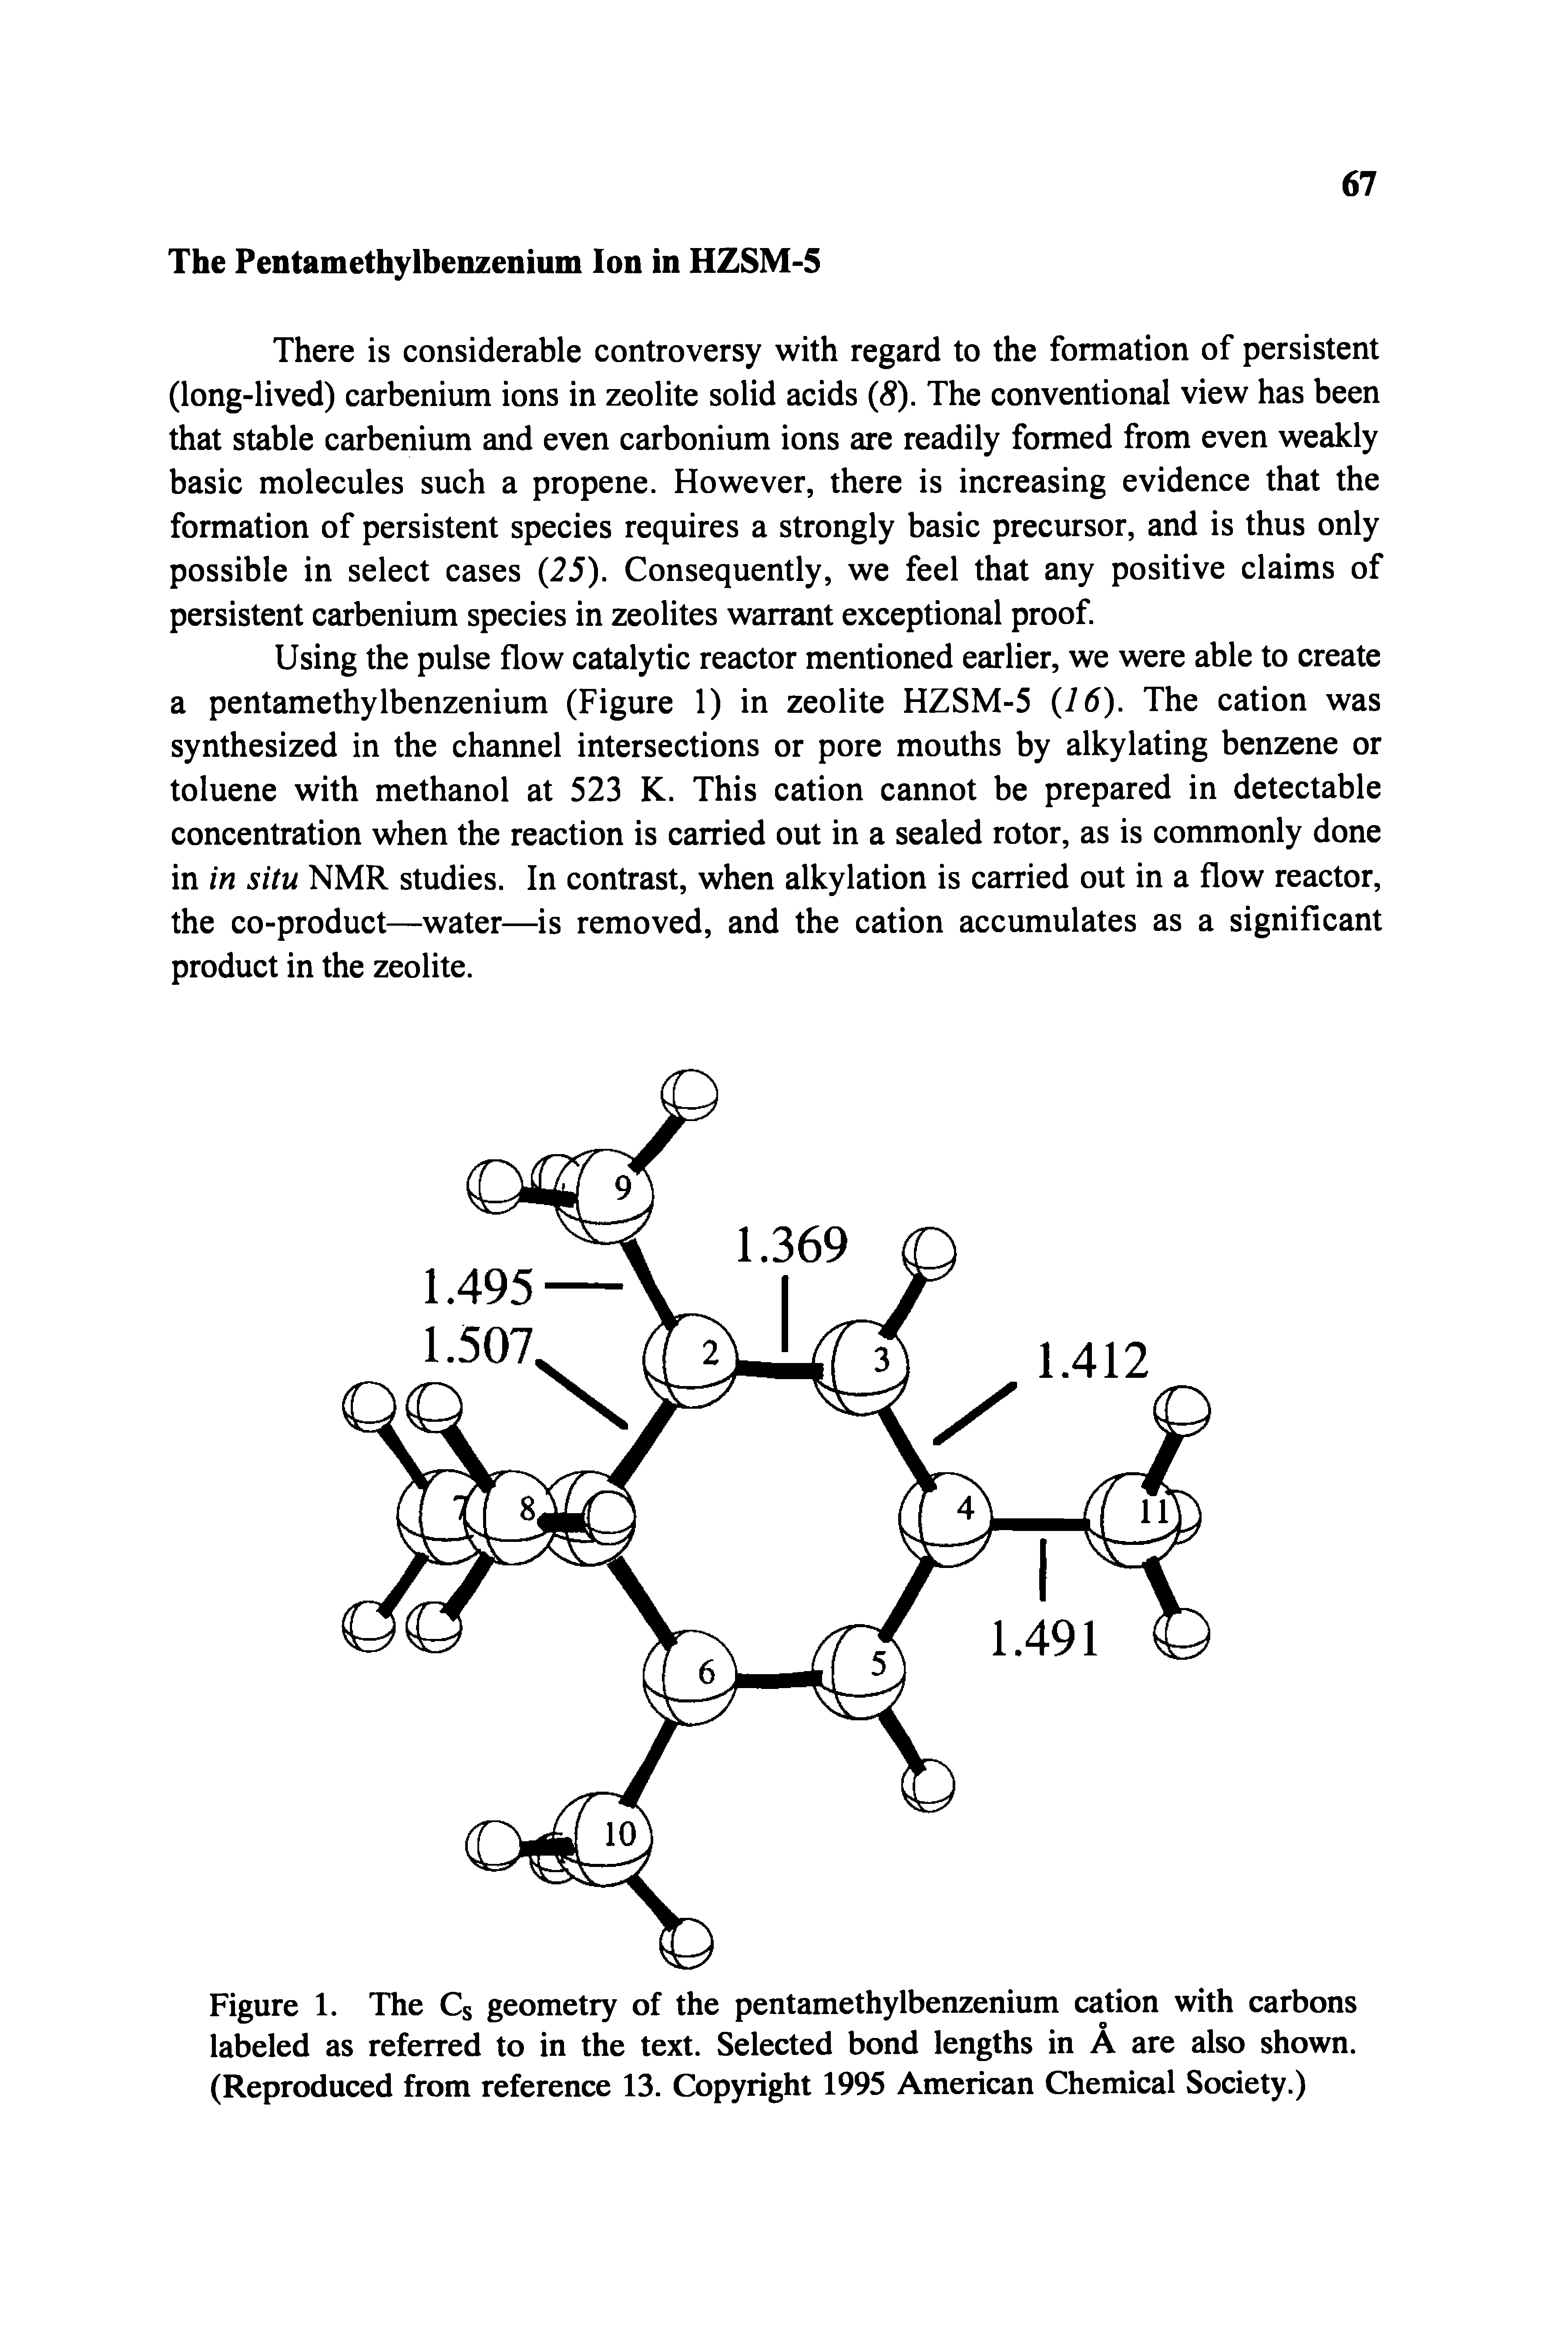 Figure 1. The Cs geometry of the pentamethylbenzenium cation with carbons labeled as referred to in the text. Selected bond lengths in A are also shown. (Reproduced from reference 13. Copyright 1995 American Chemical Society.)...